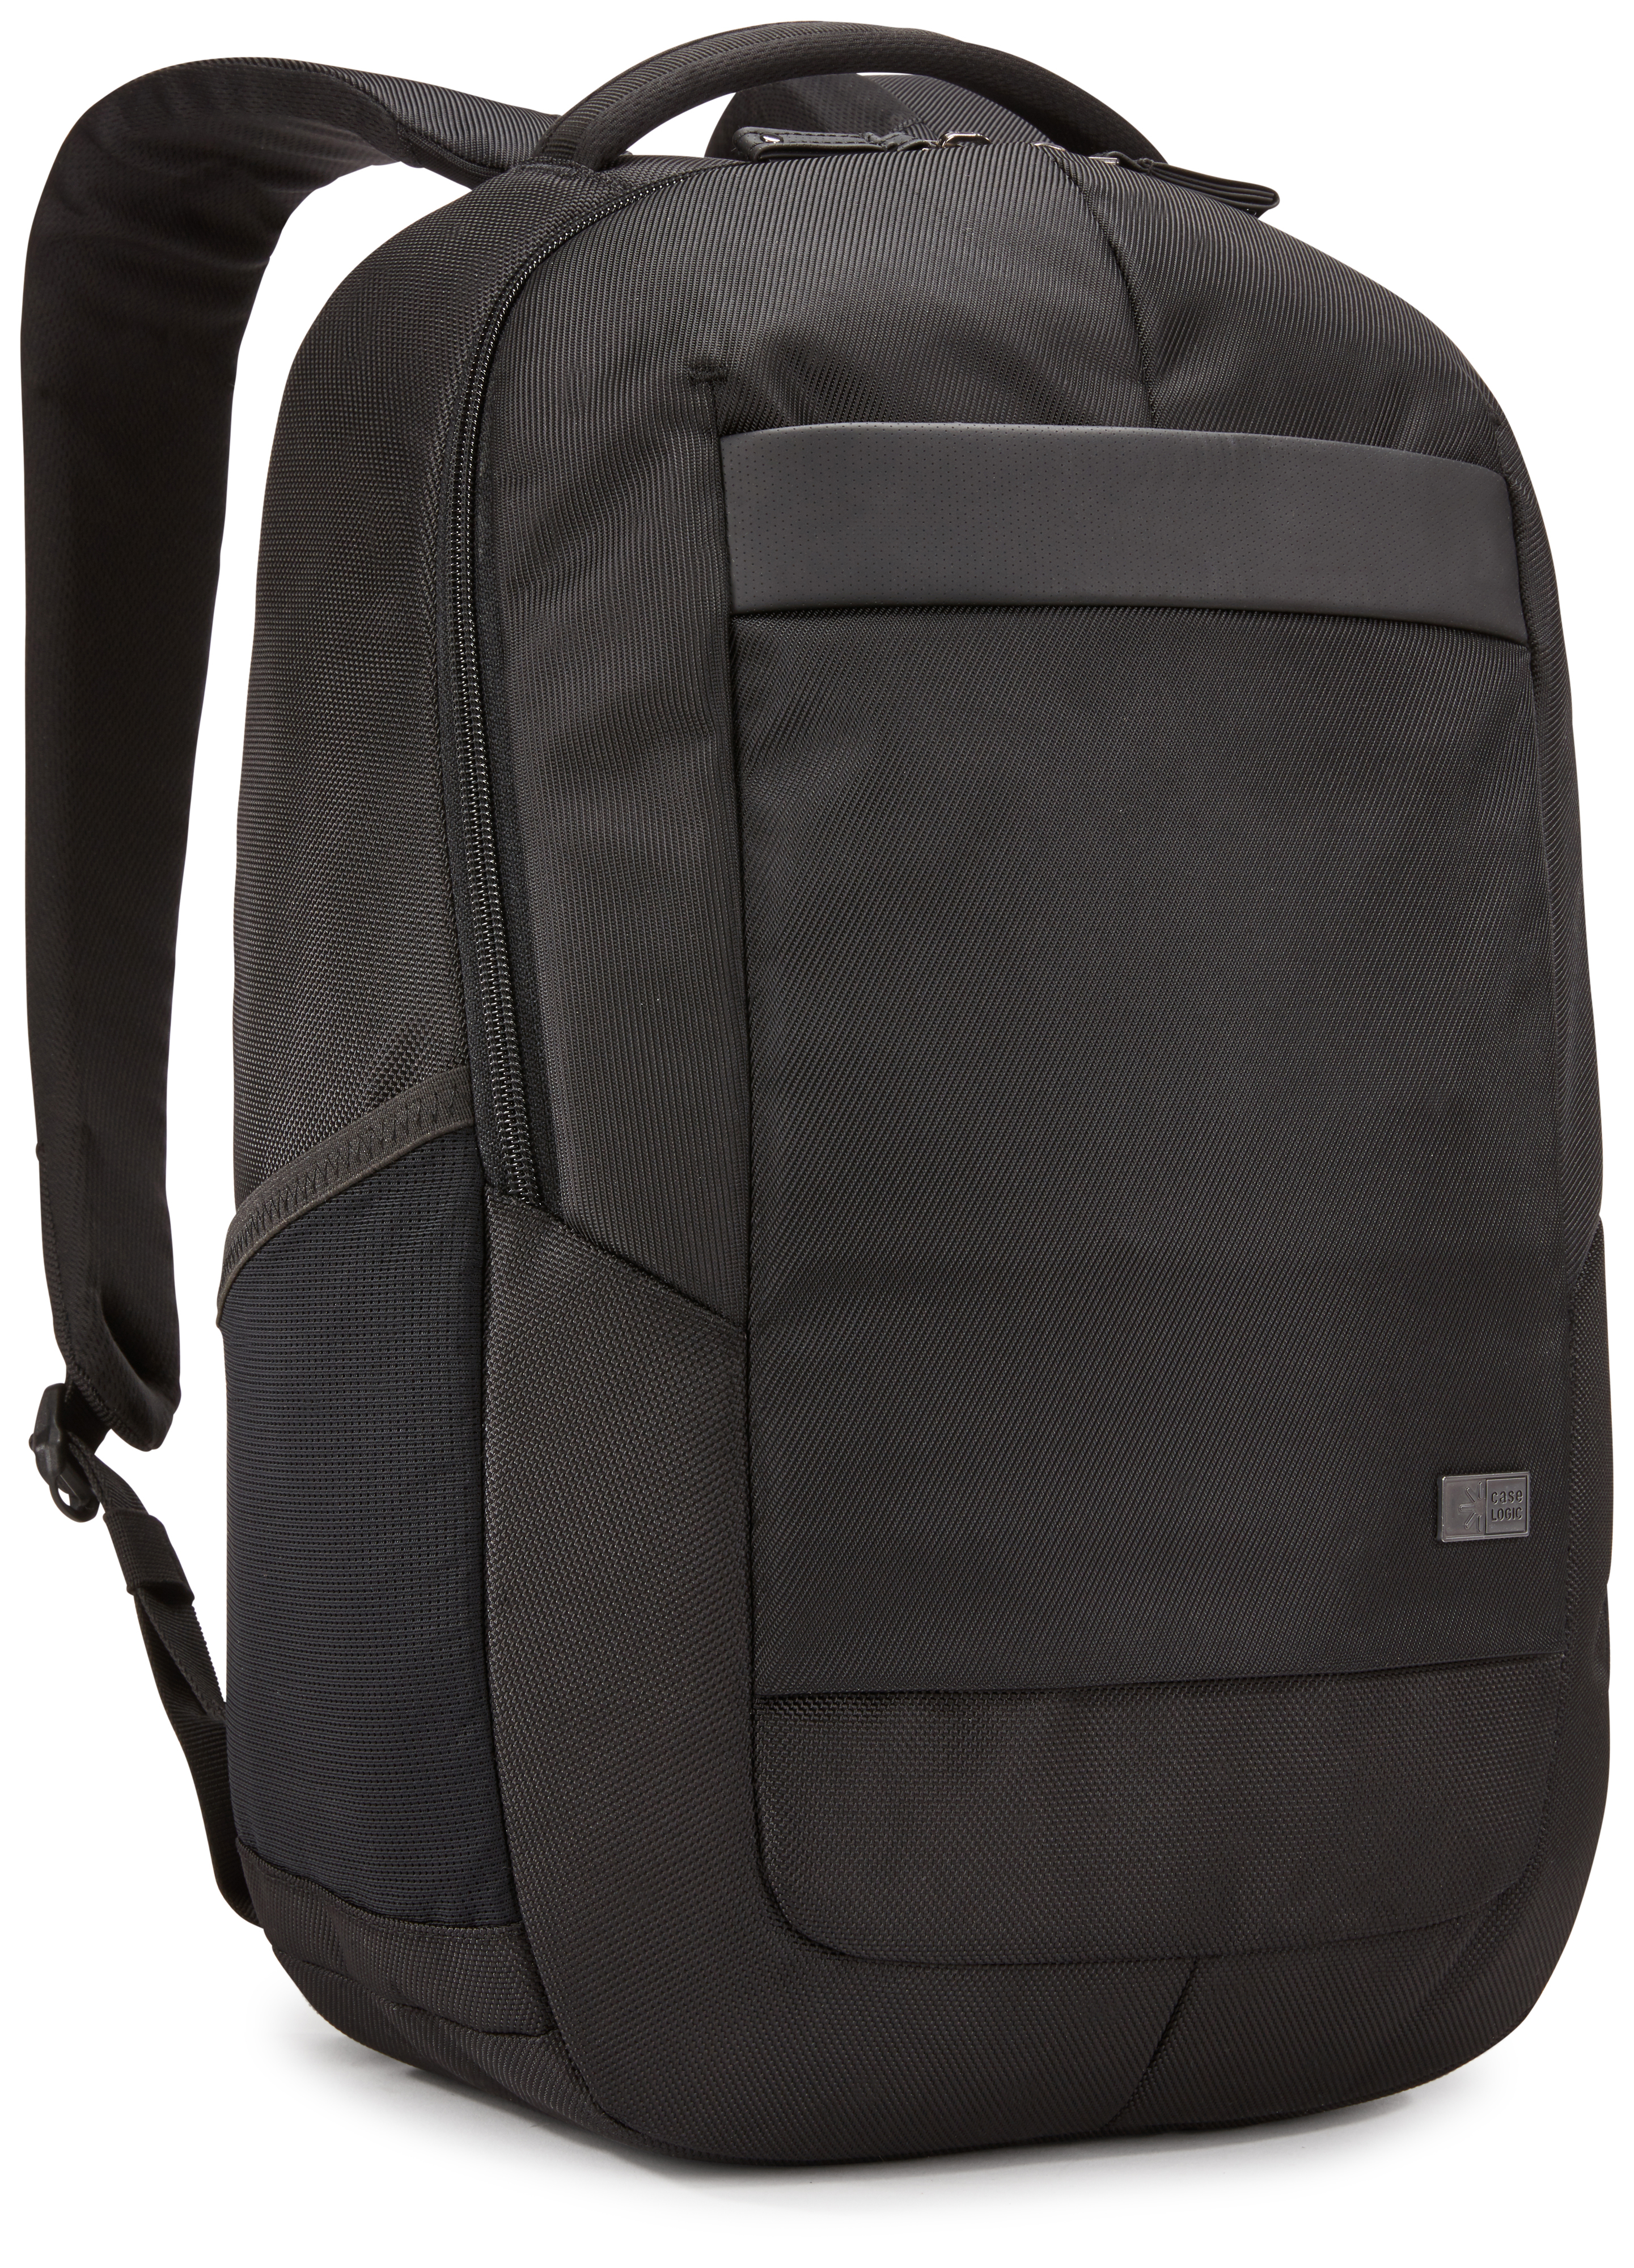 Thule - Computer Accessories     Case Logic Notion Backpack 14in                                         3204200